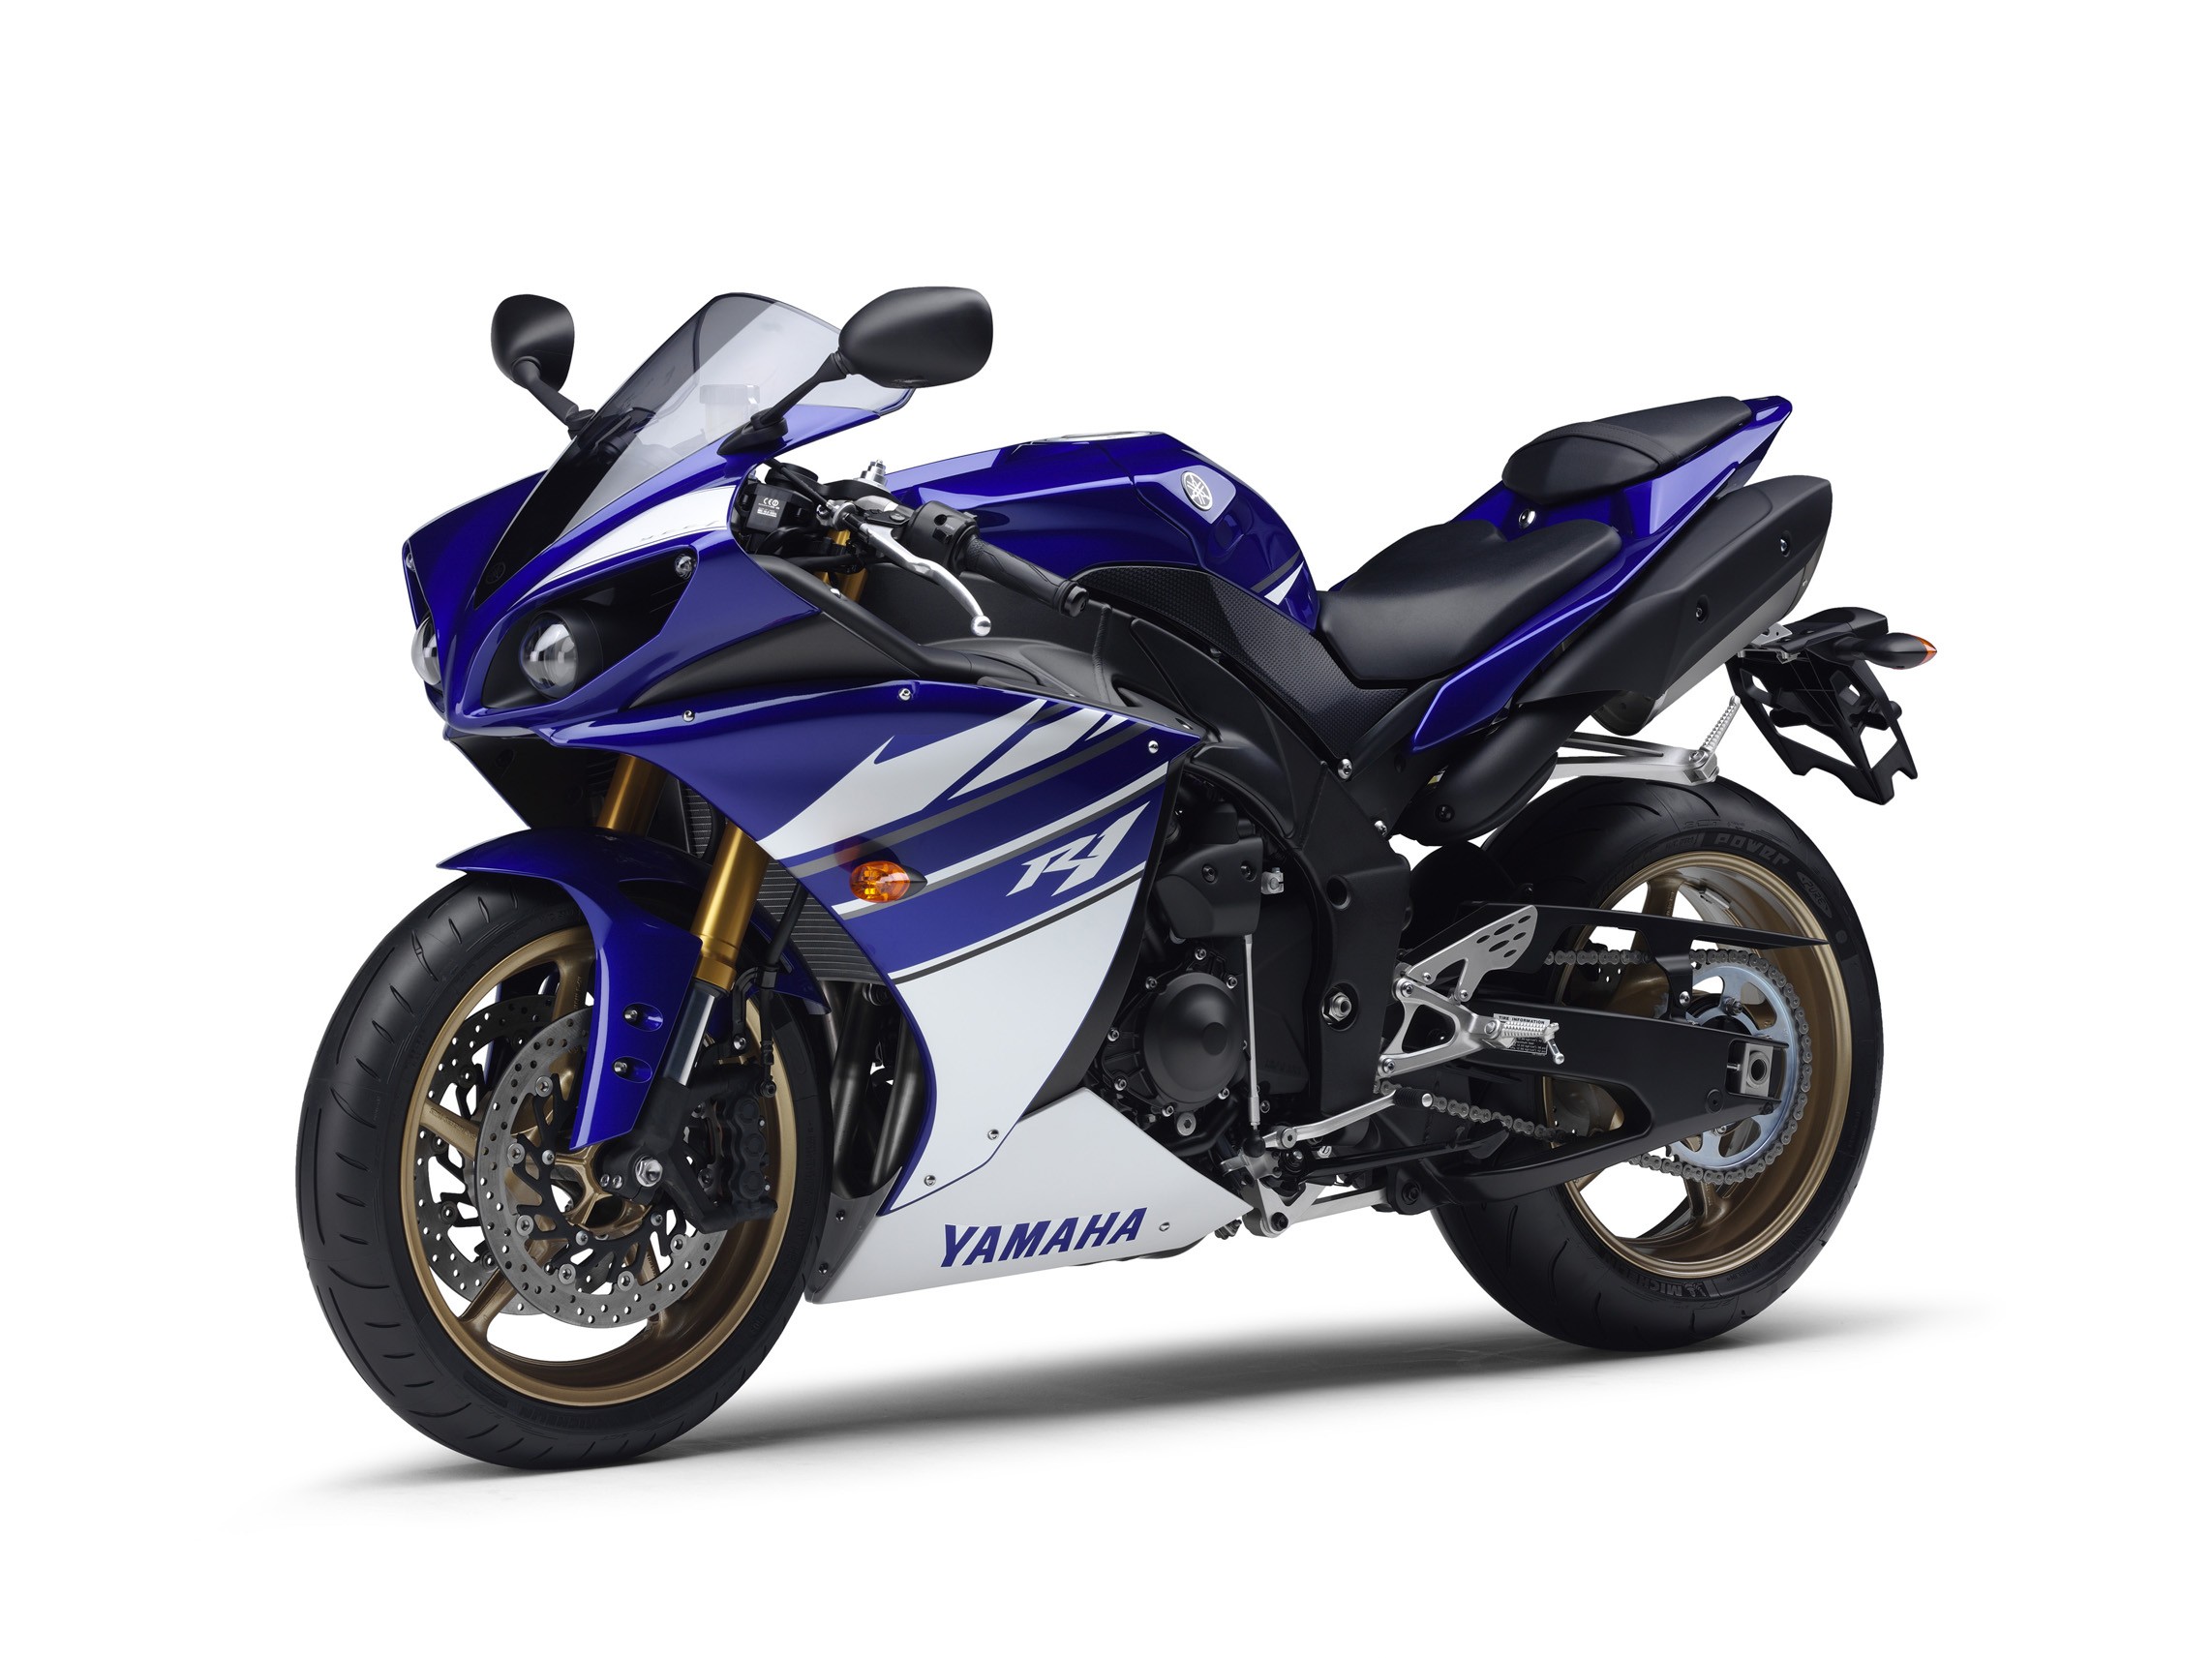 2010 Yamaha YZF-R1 - Now available in India